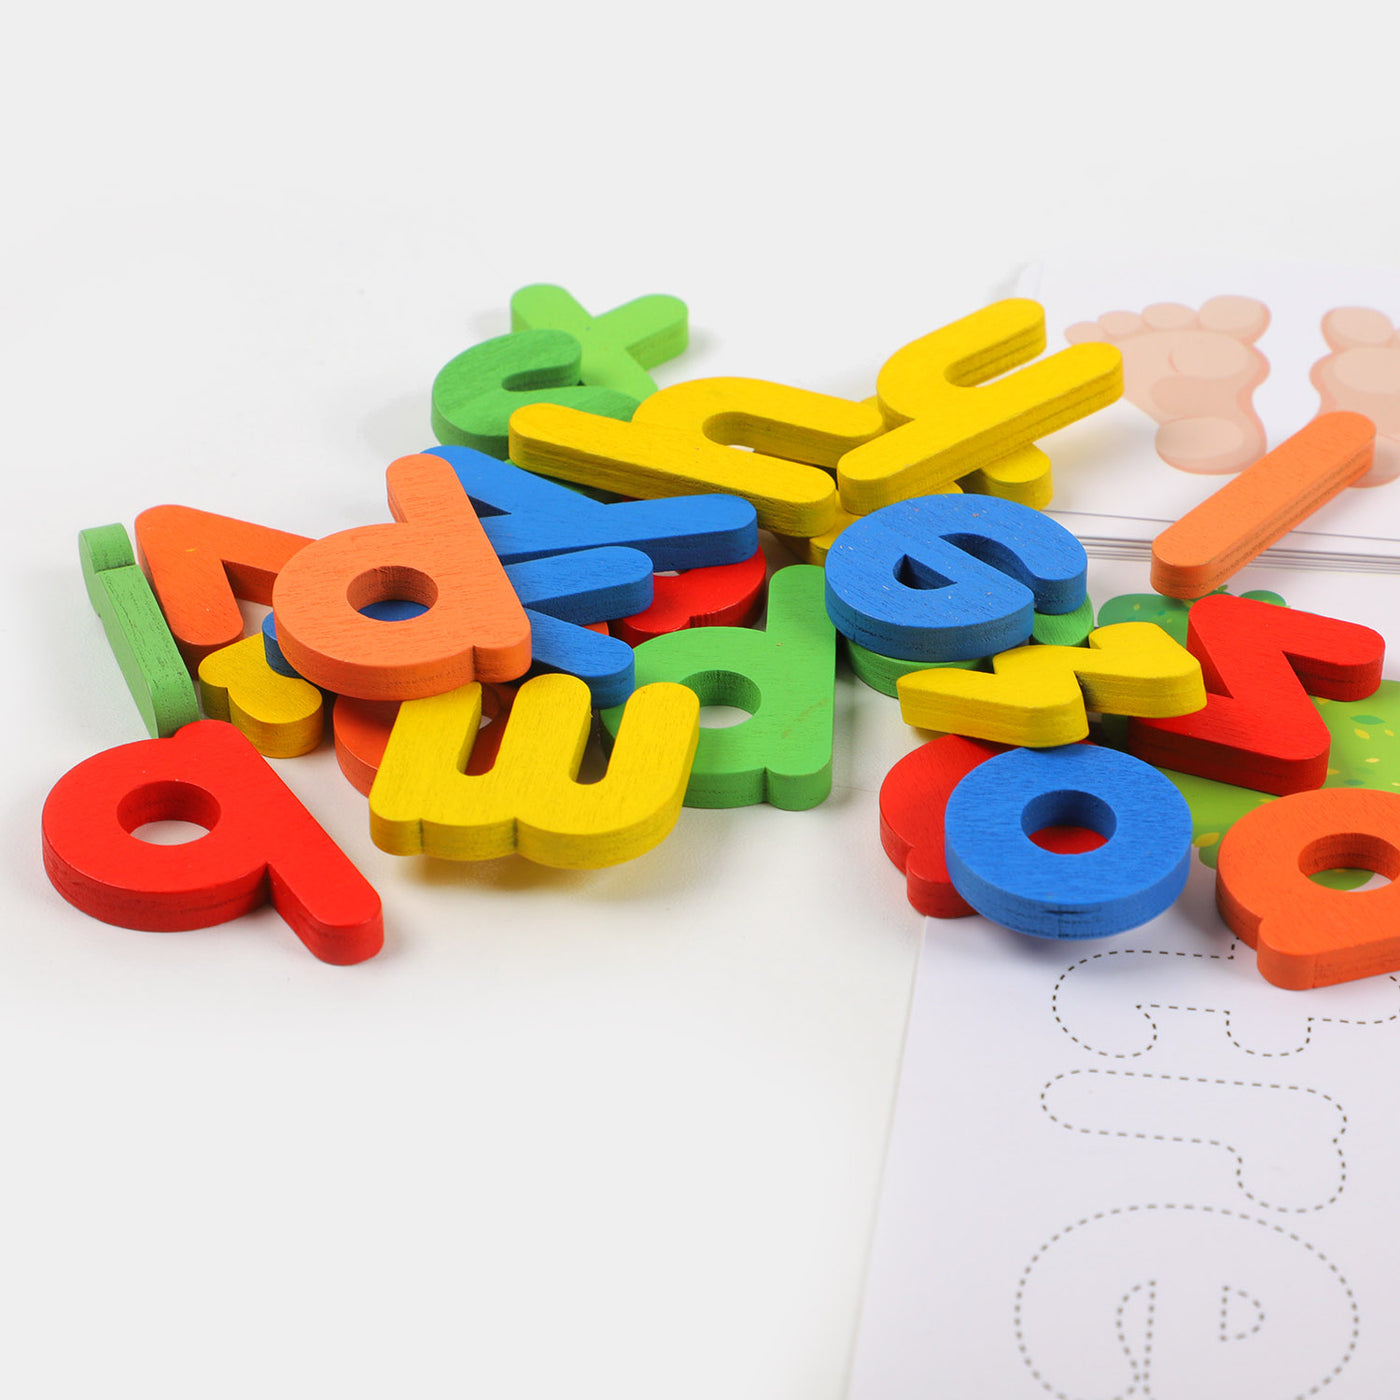 Educational Wooden Spelling Game Toy For kids